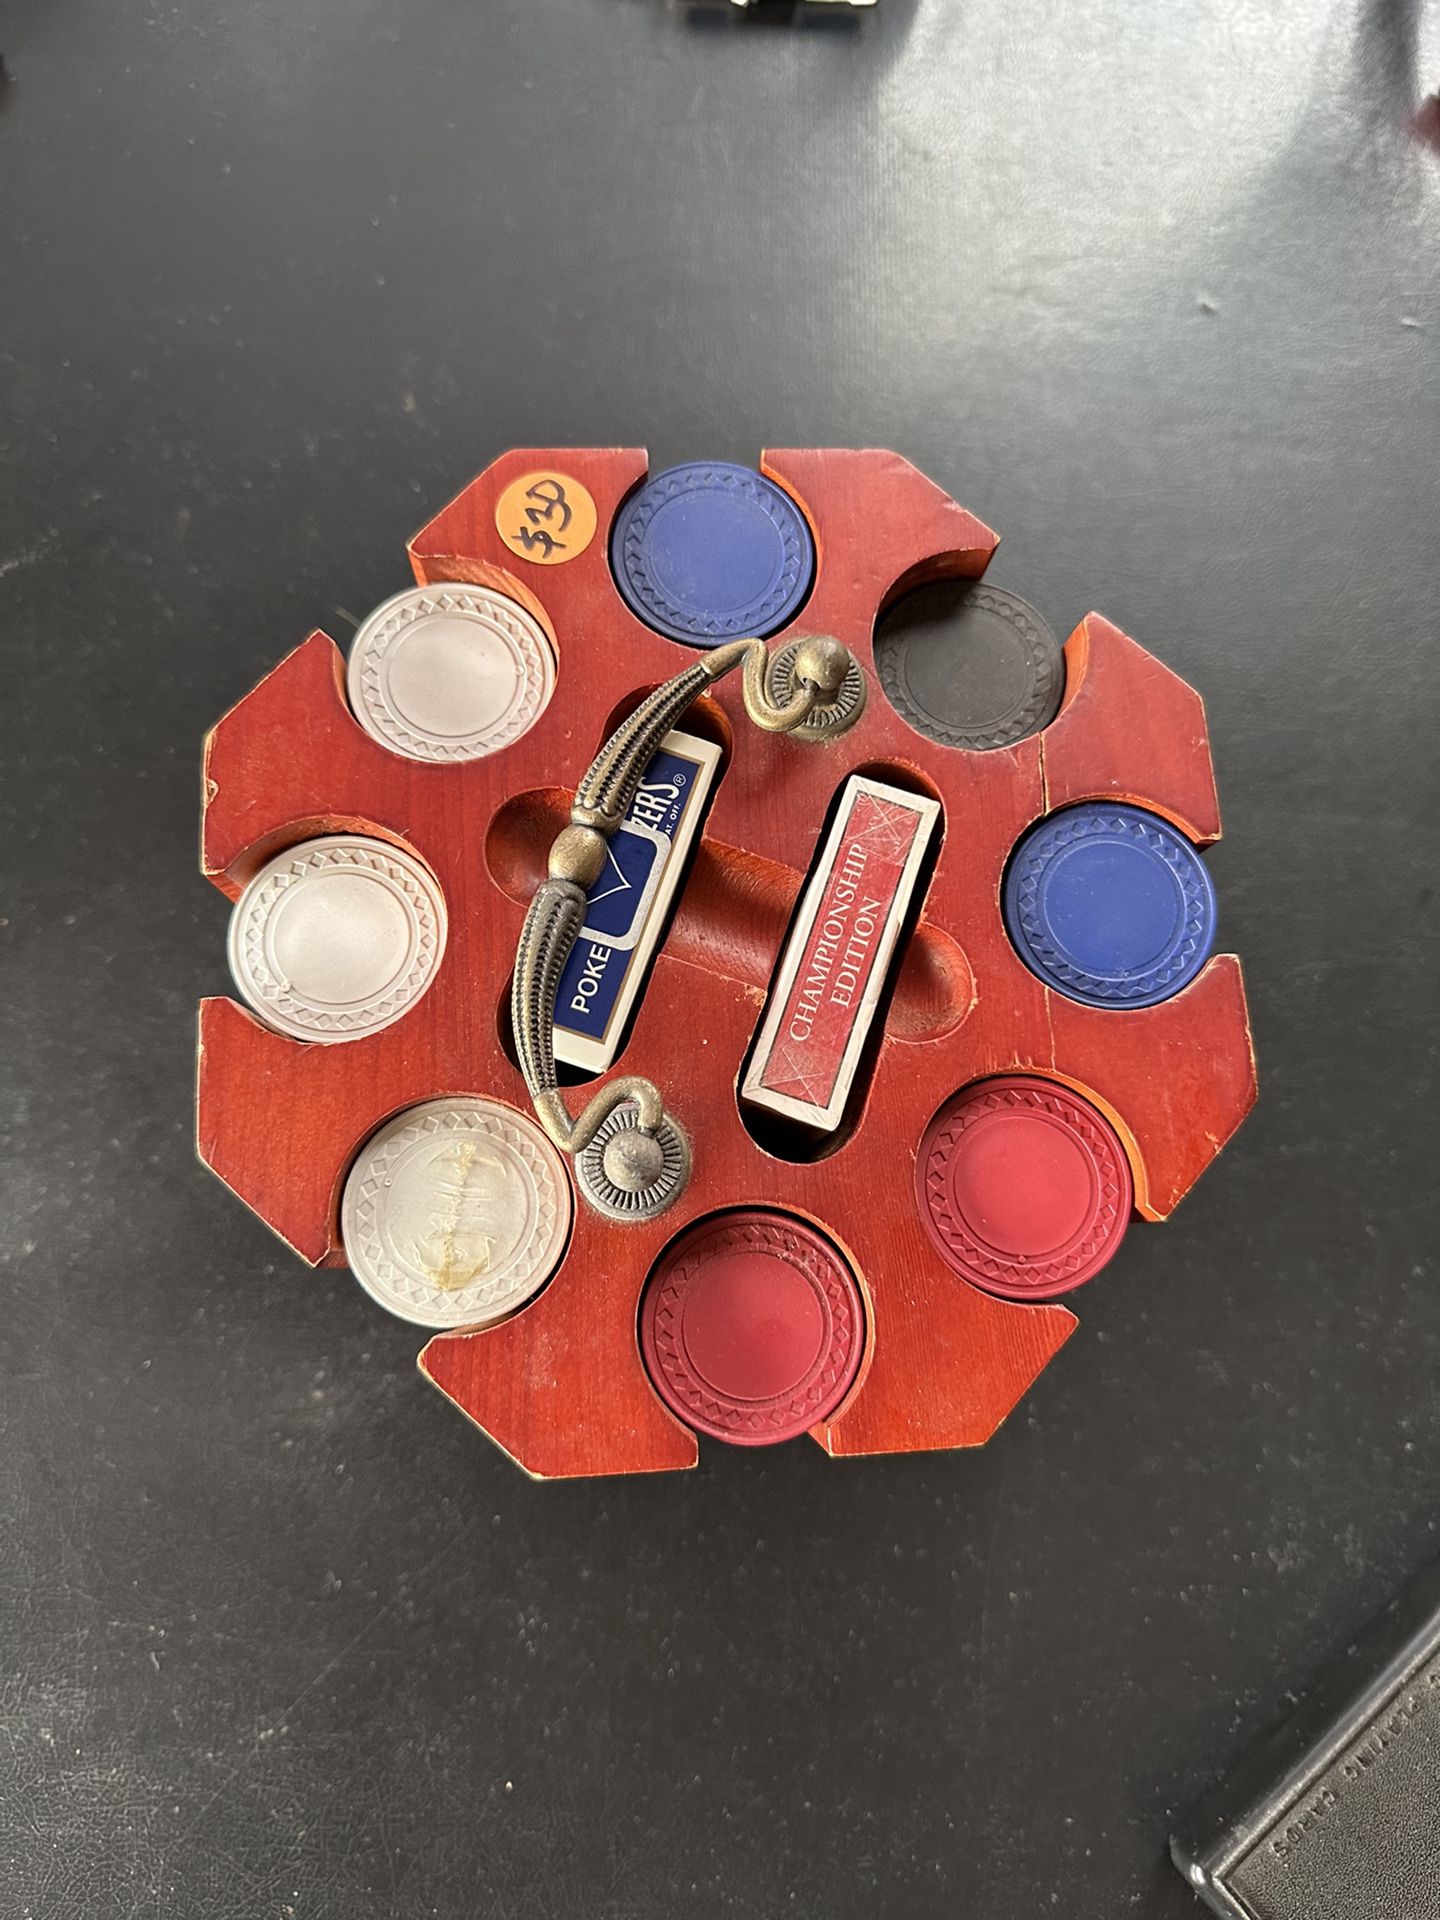 Vintage wood poker caddy with handle and Wood Poker chips. As seen in the picture, it is the poker caddy and everything inside of it 